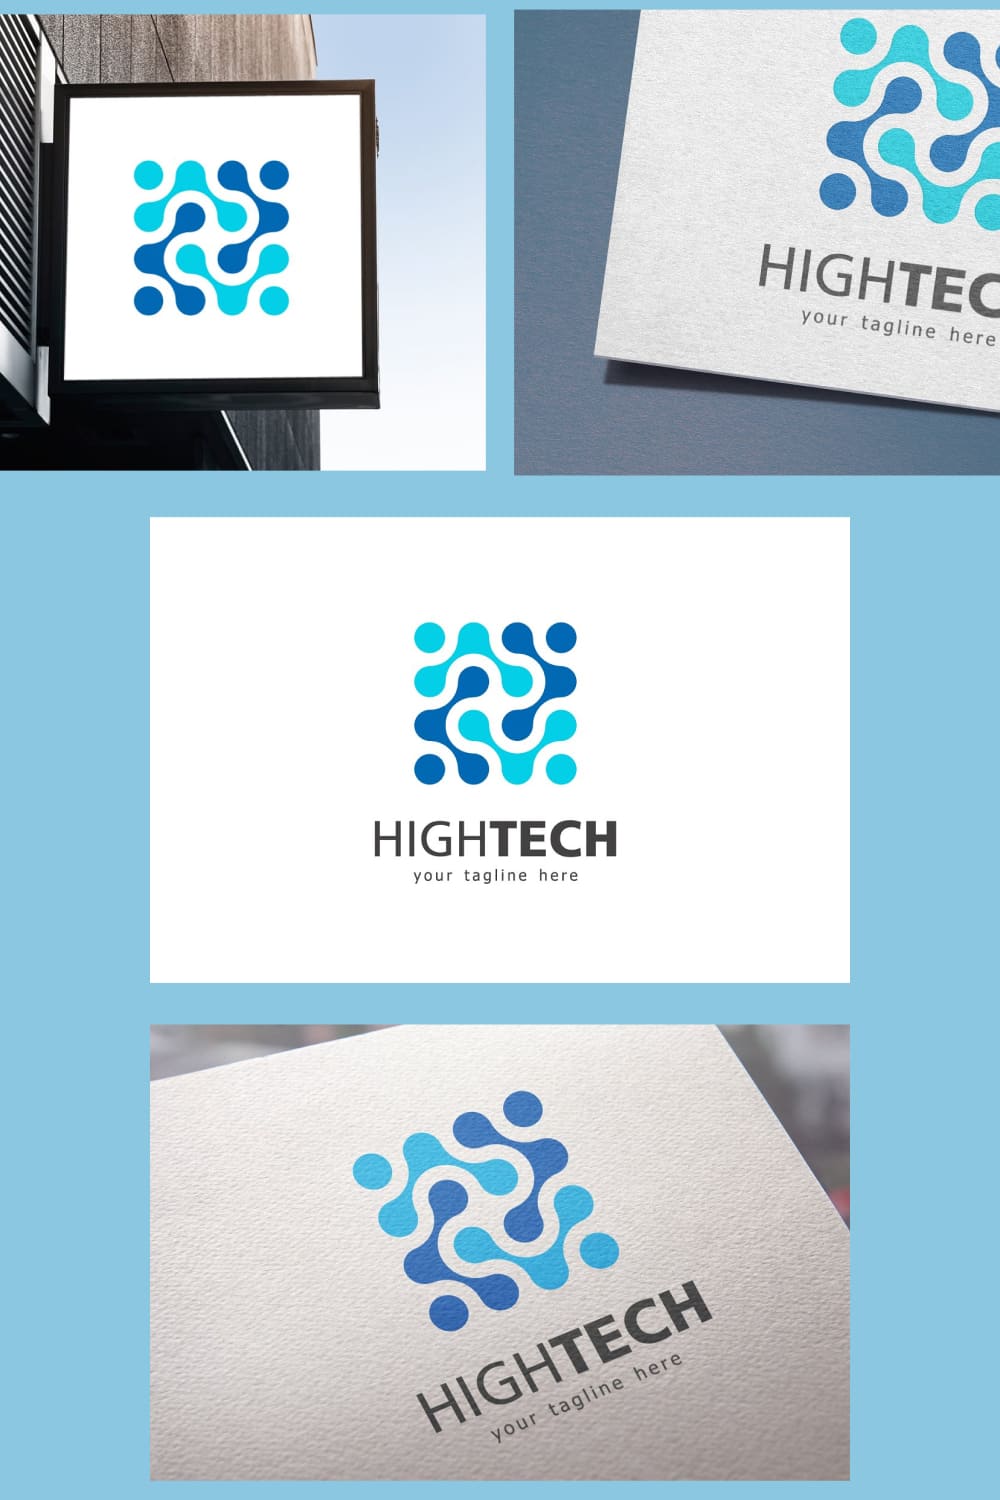 A great logo suitable for internet, communications, media, financial, technology, advertising agencies, design houses and web companies.